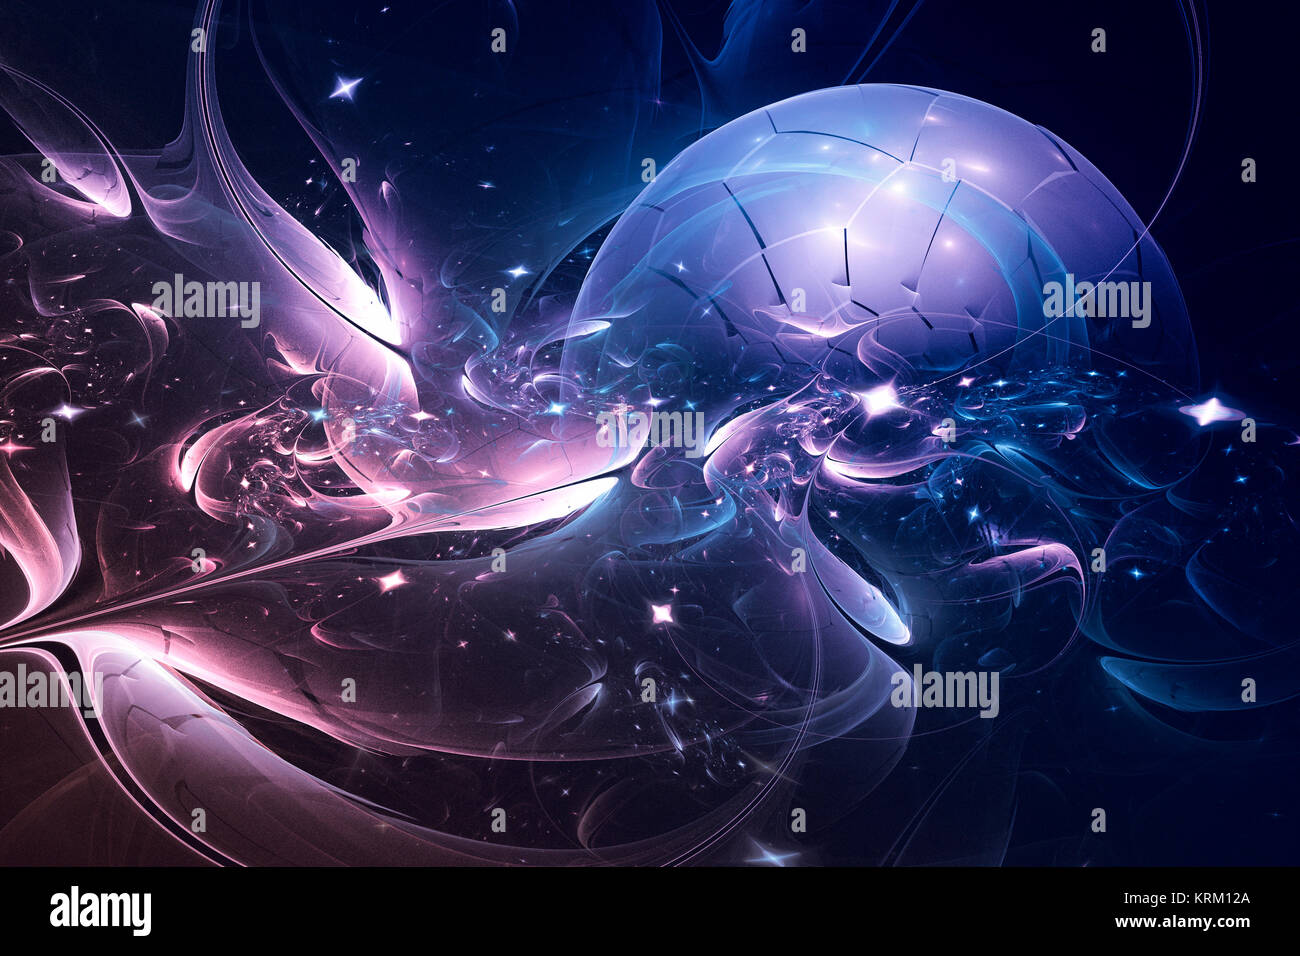 Fractal image of a space landscape. Stock Photo